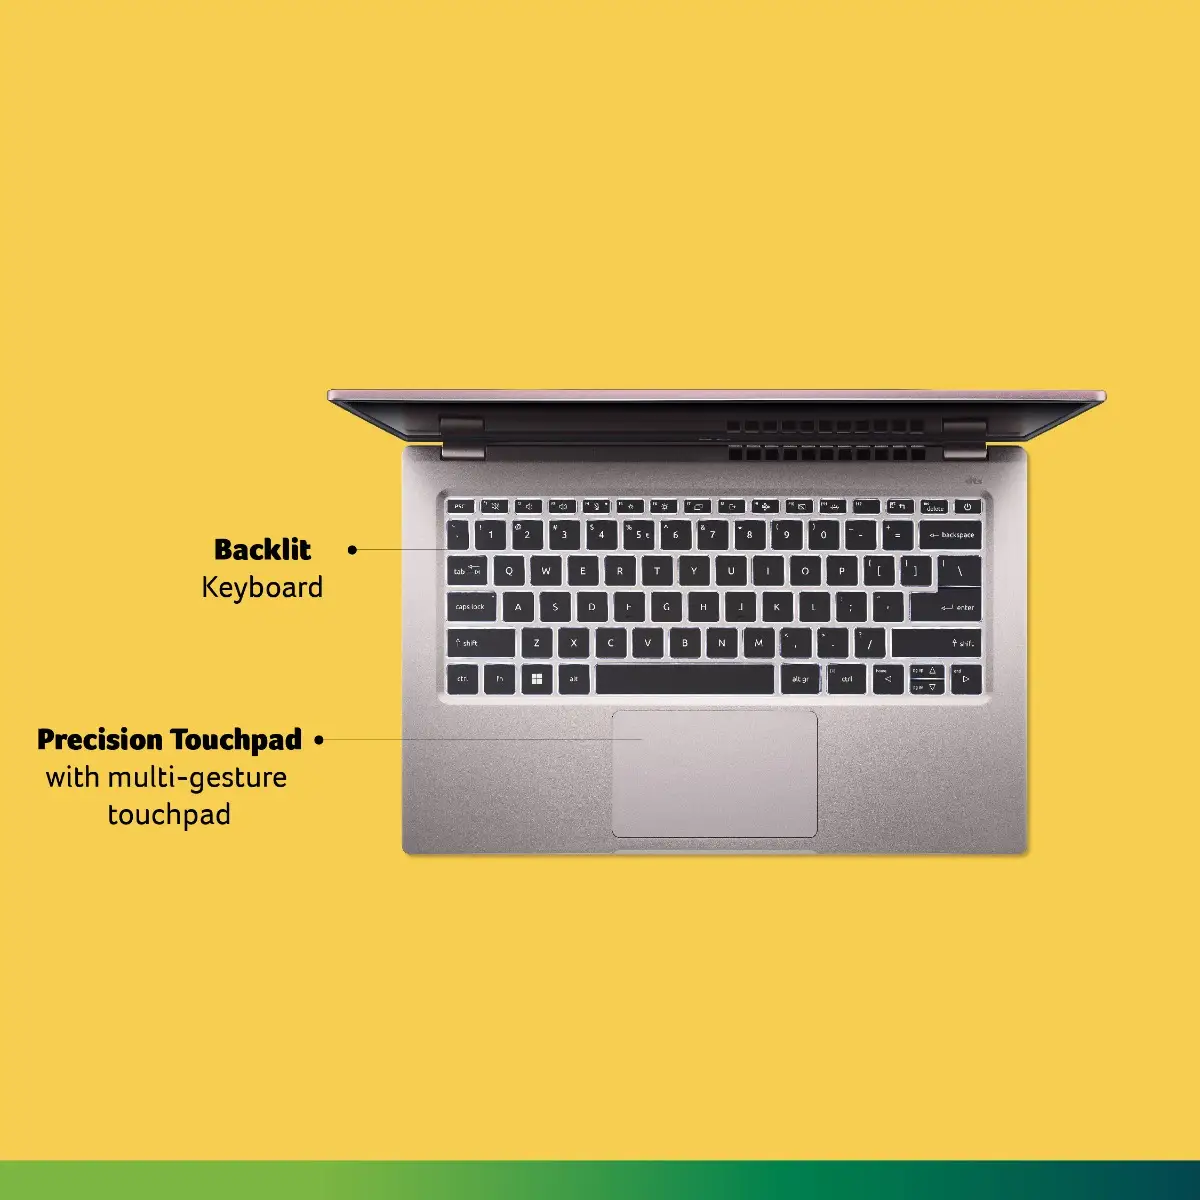 Acer Swift Go 14 Backlit keyboard and precision touchpad: Provides comfortable and accurate typing and navigation